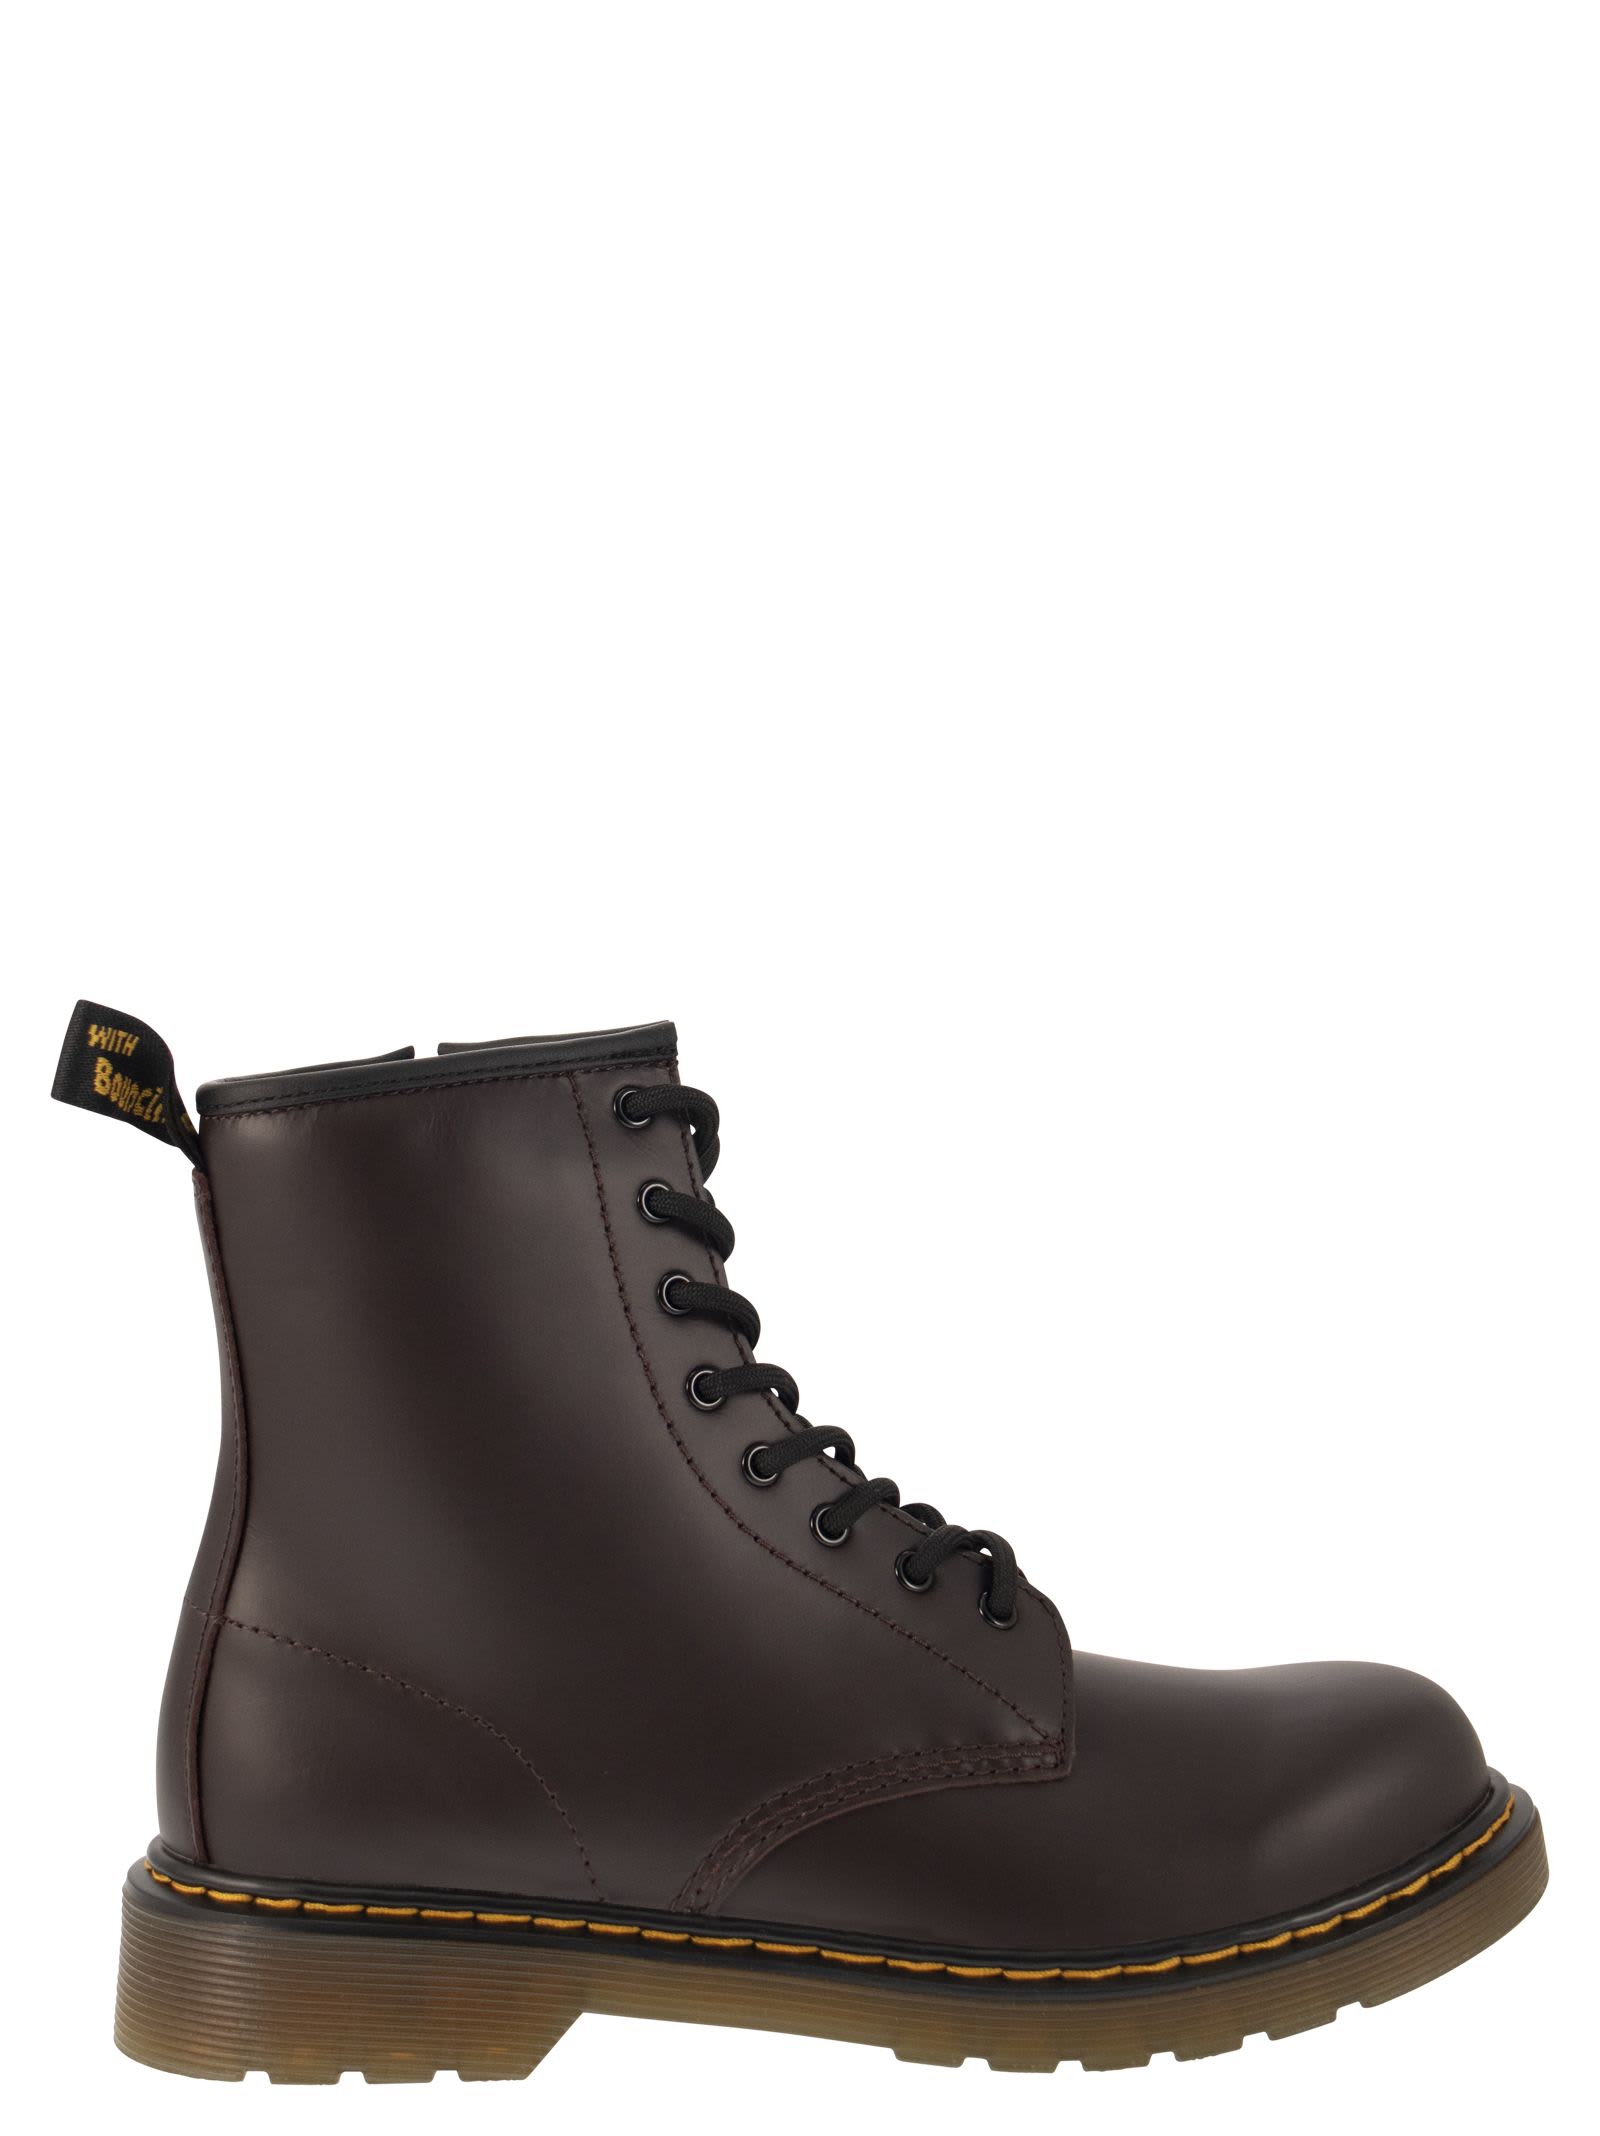 Dr. Martens 1460 - Romario Leather Boots